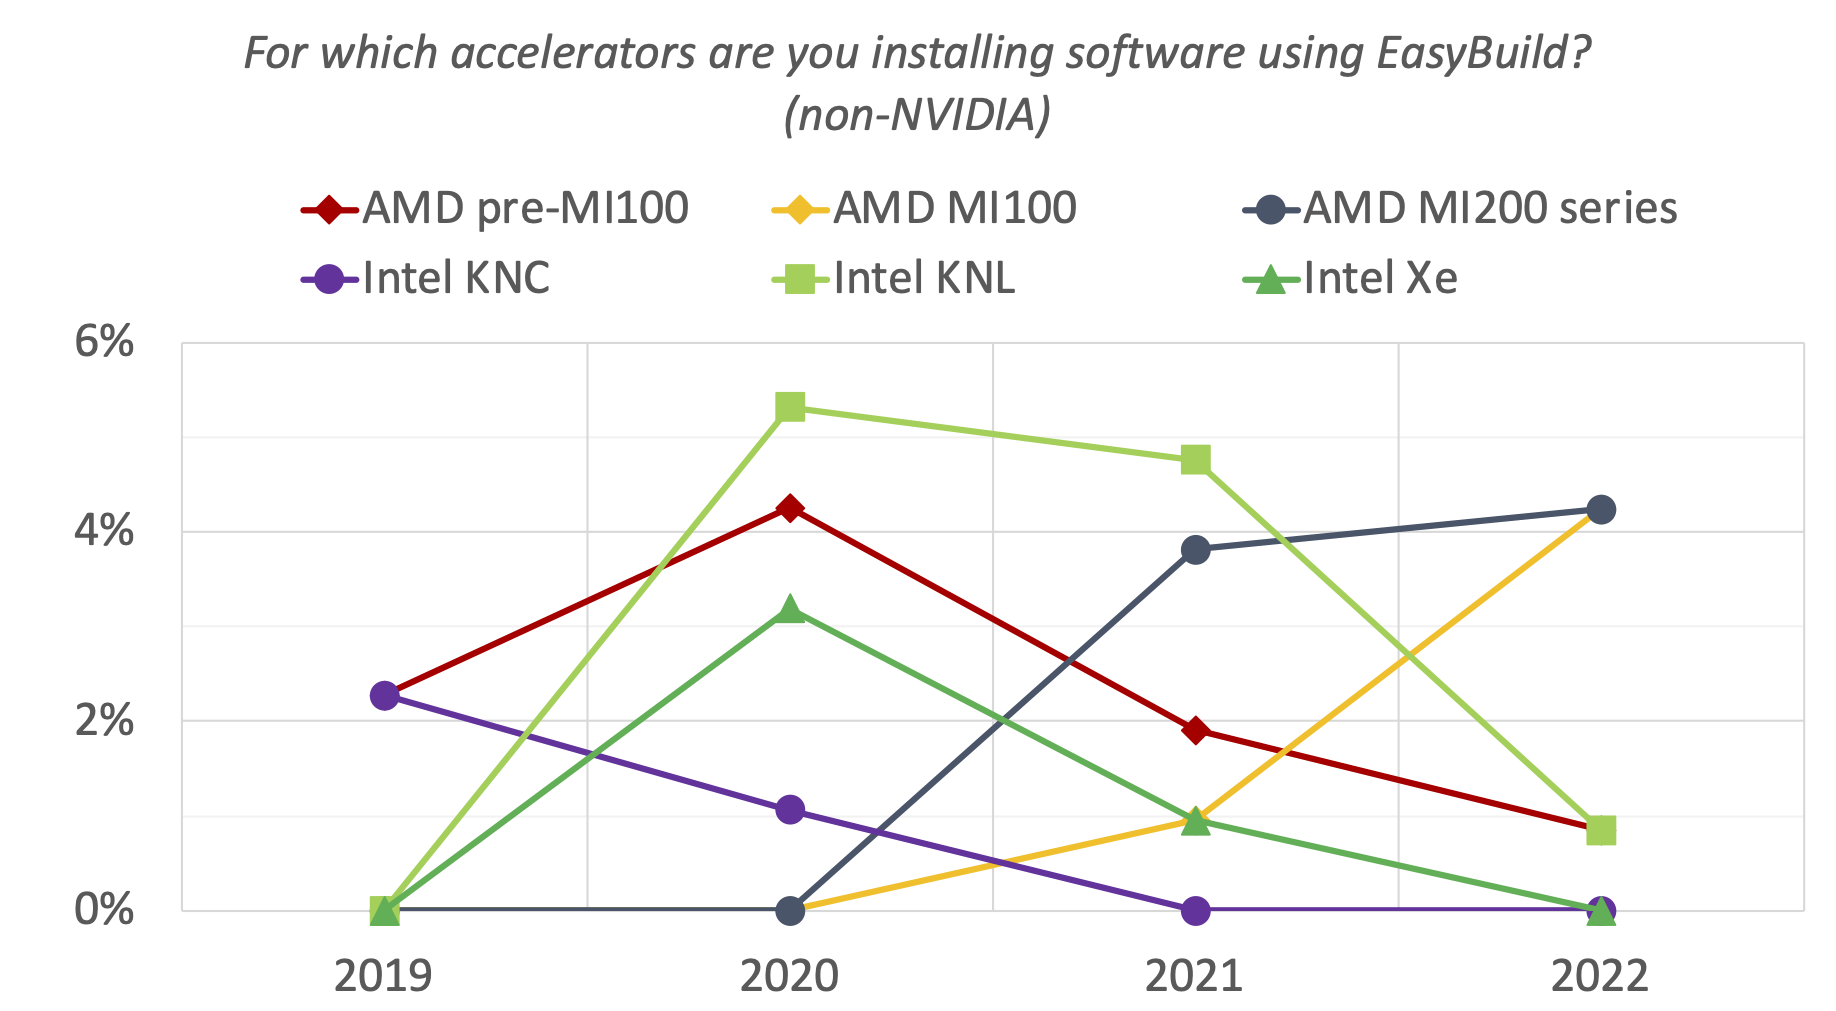 16. For which accelerators are you installing software using EasyBuild? (non-NVIDIA)